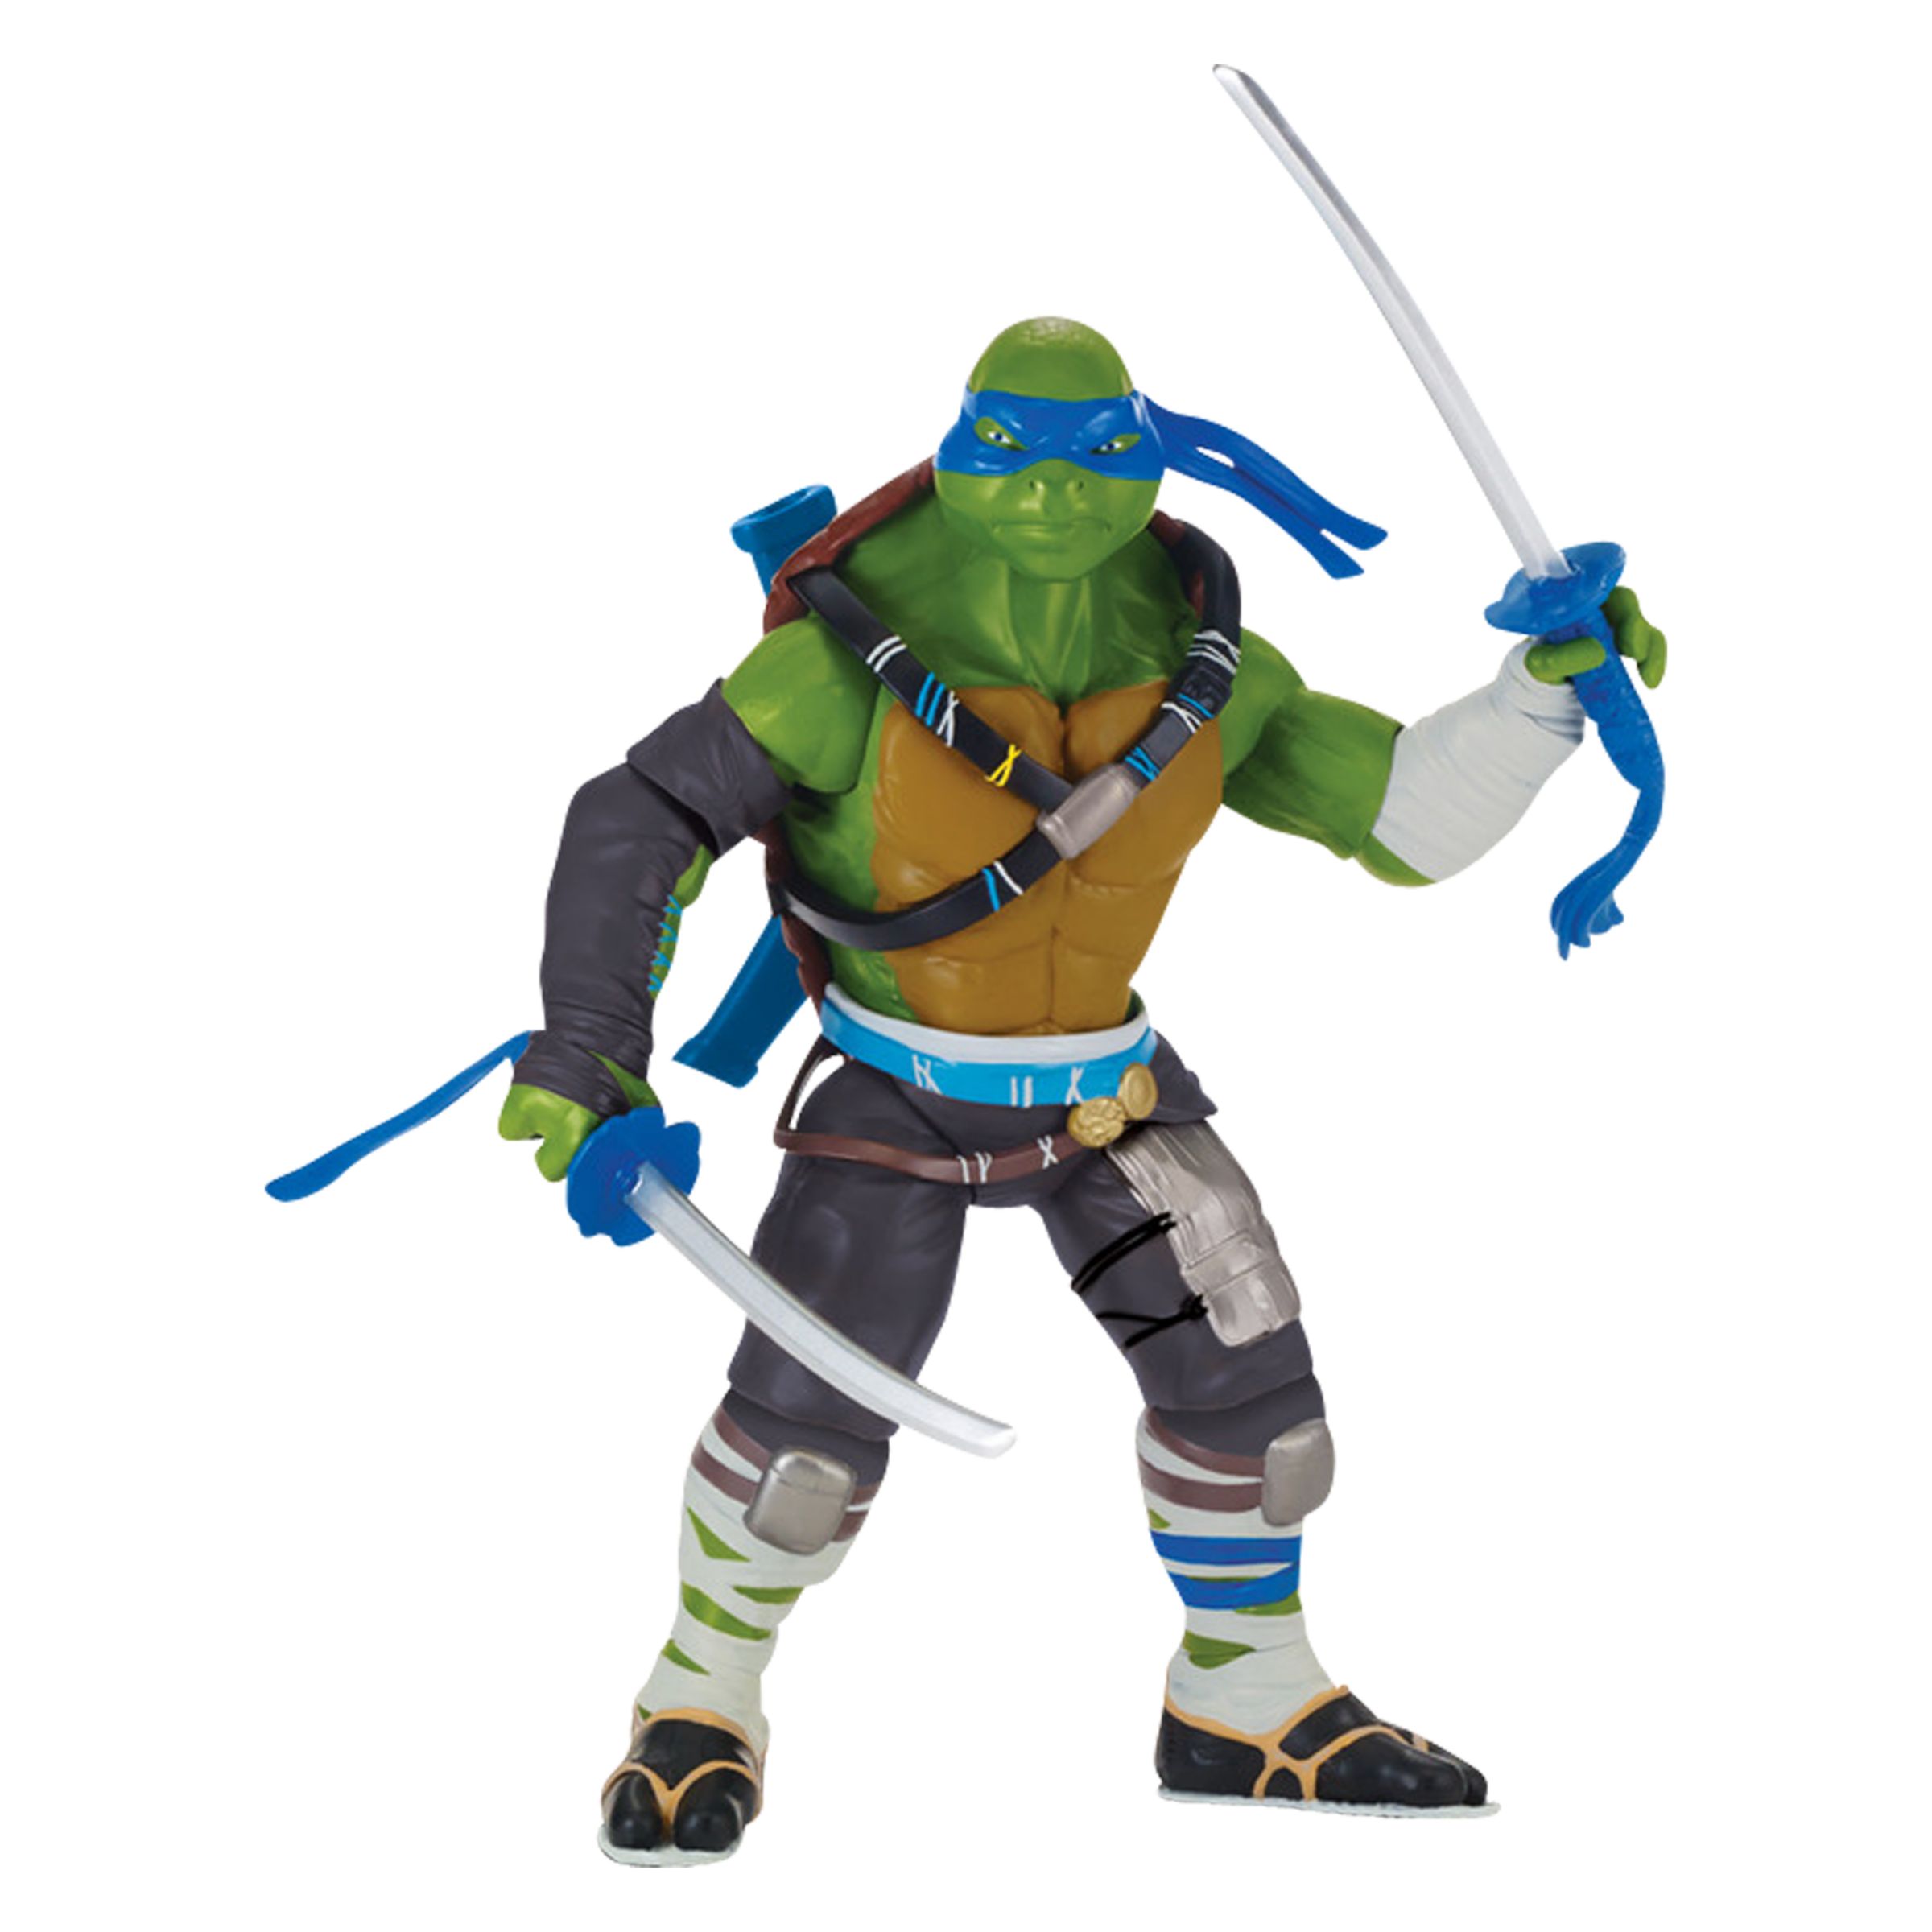 ninja turtles out of the shadows action figures